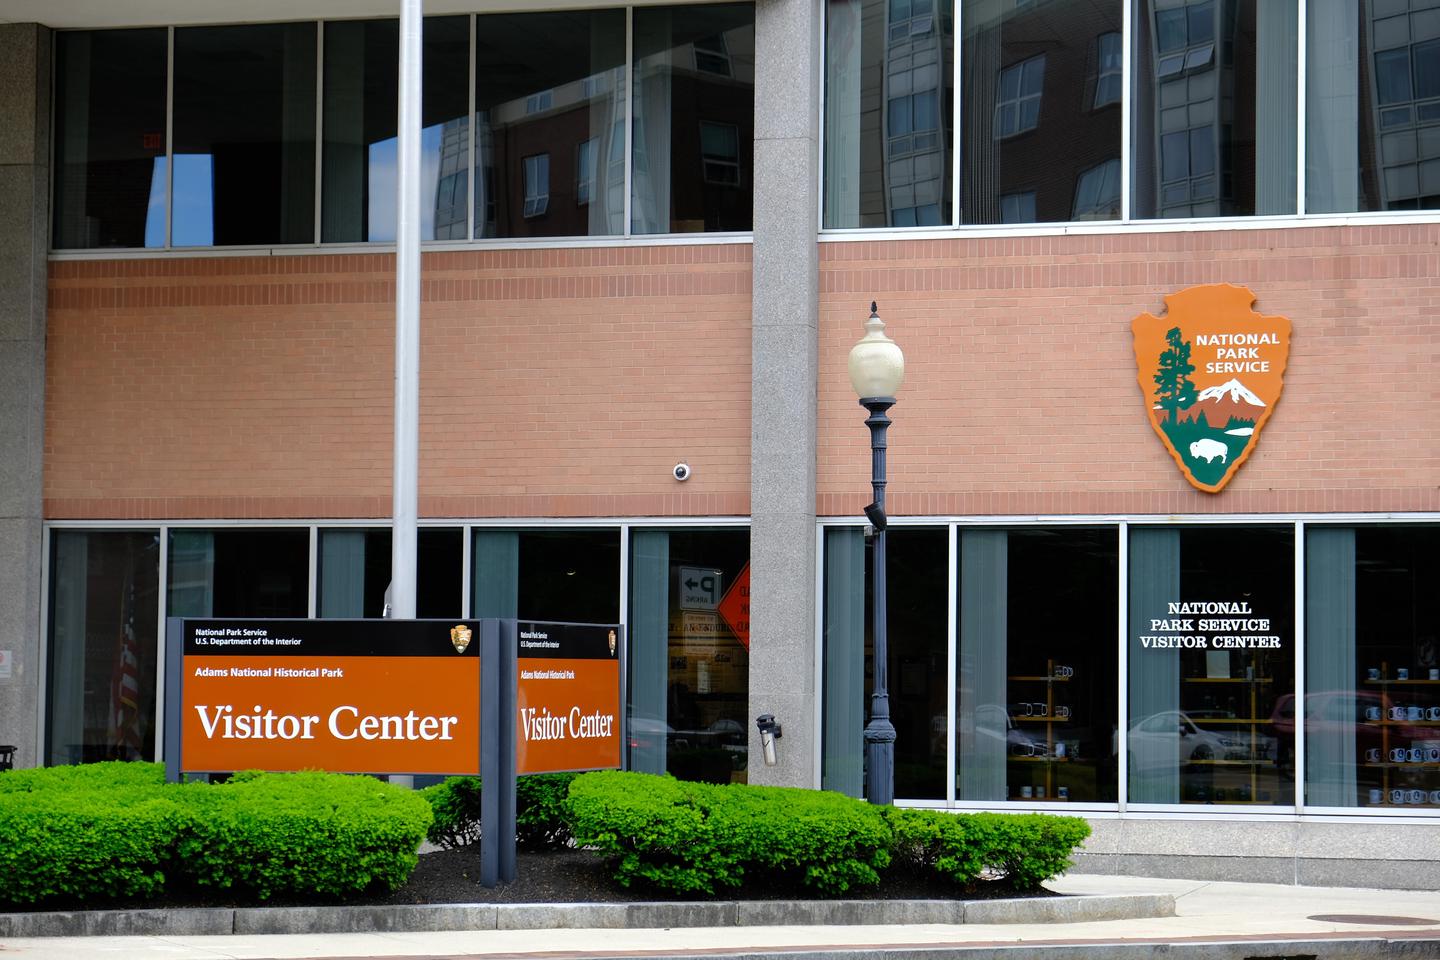 A sign that reads "Visitor Center" stands in front of a brick and glass office building with large windows. A National Park Service arrowhead hangs from the building. The Visitor Center, located at 1250 Hancock St., is a great place to start your day at Adams National Historical Park.